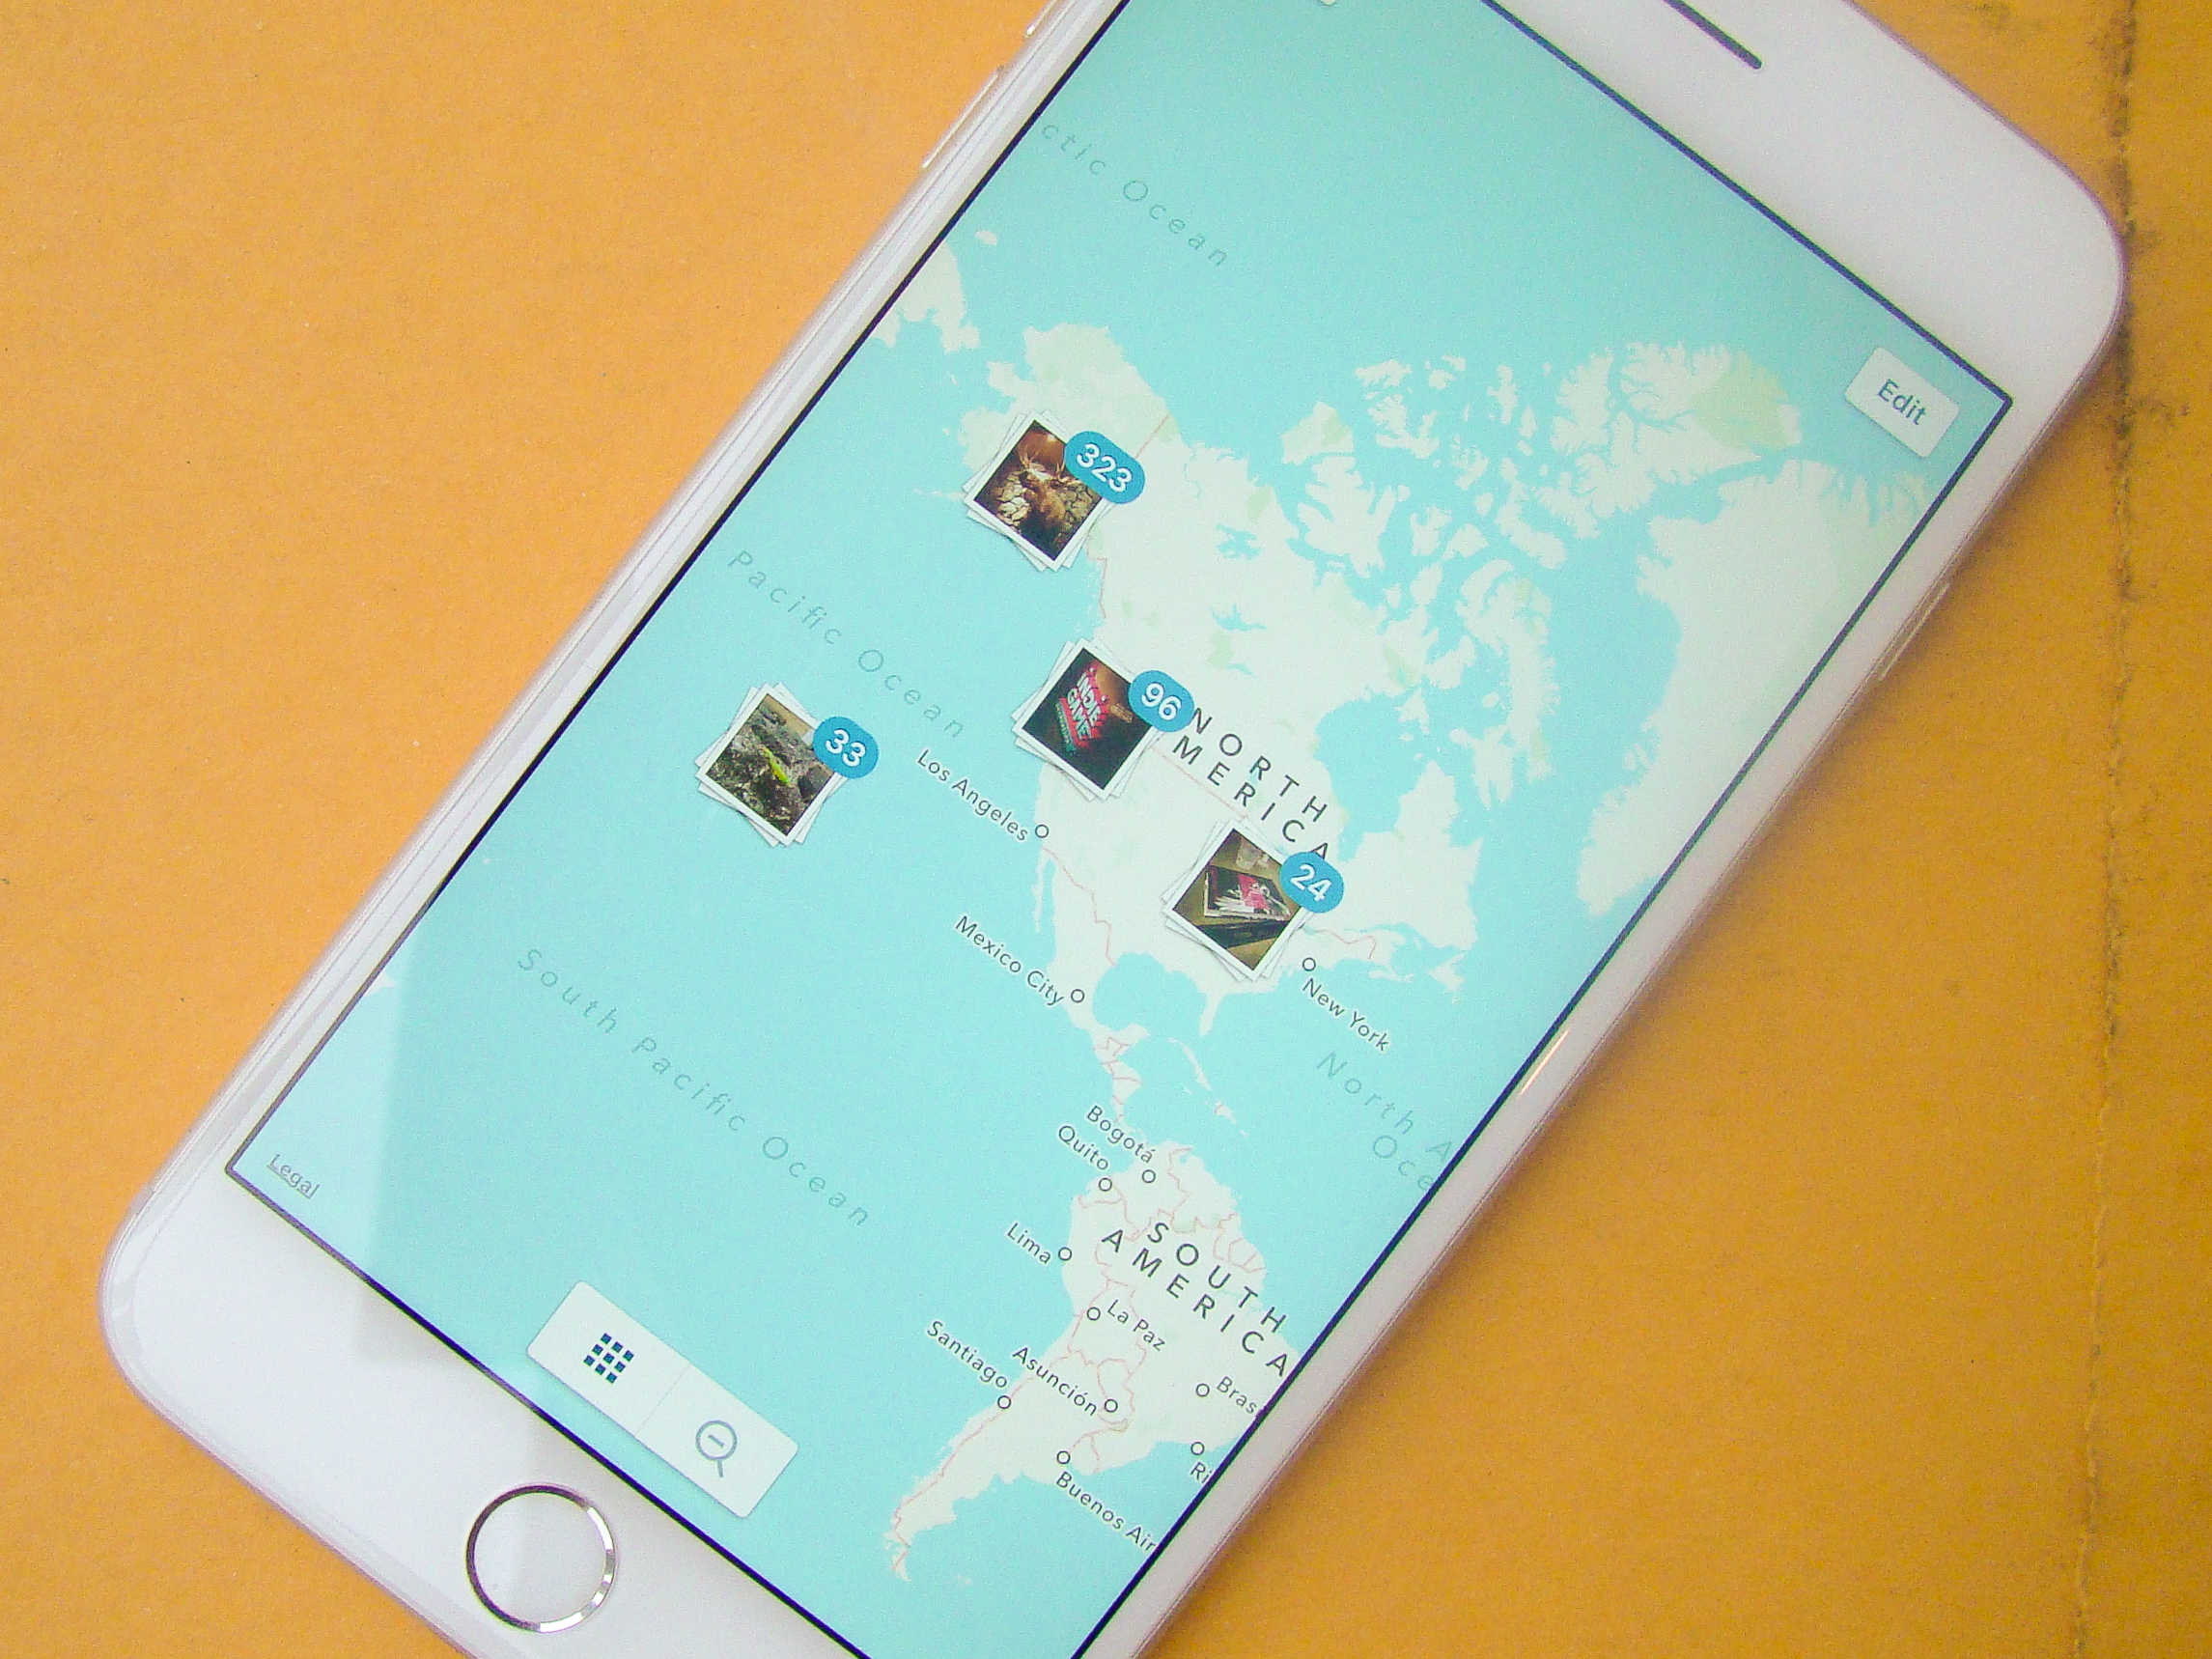 Who's tracking your Instagram movements?